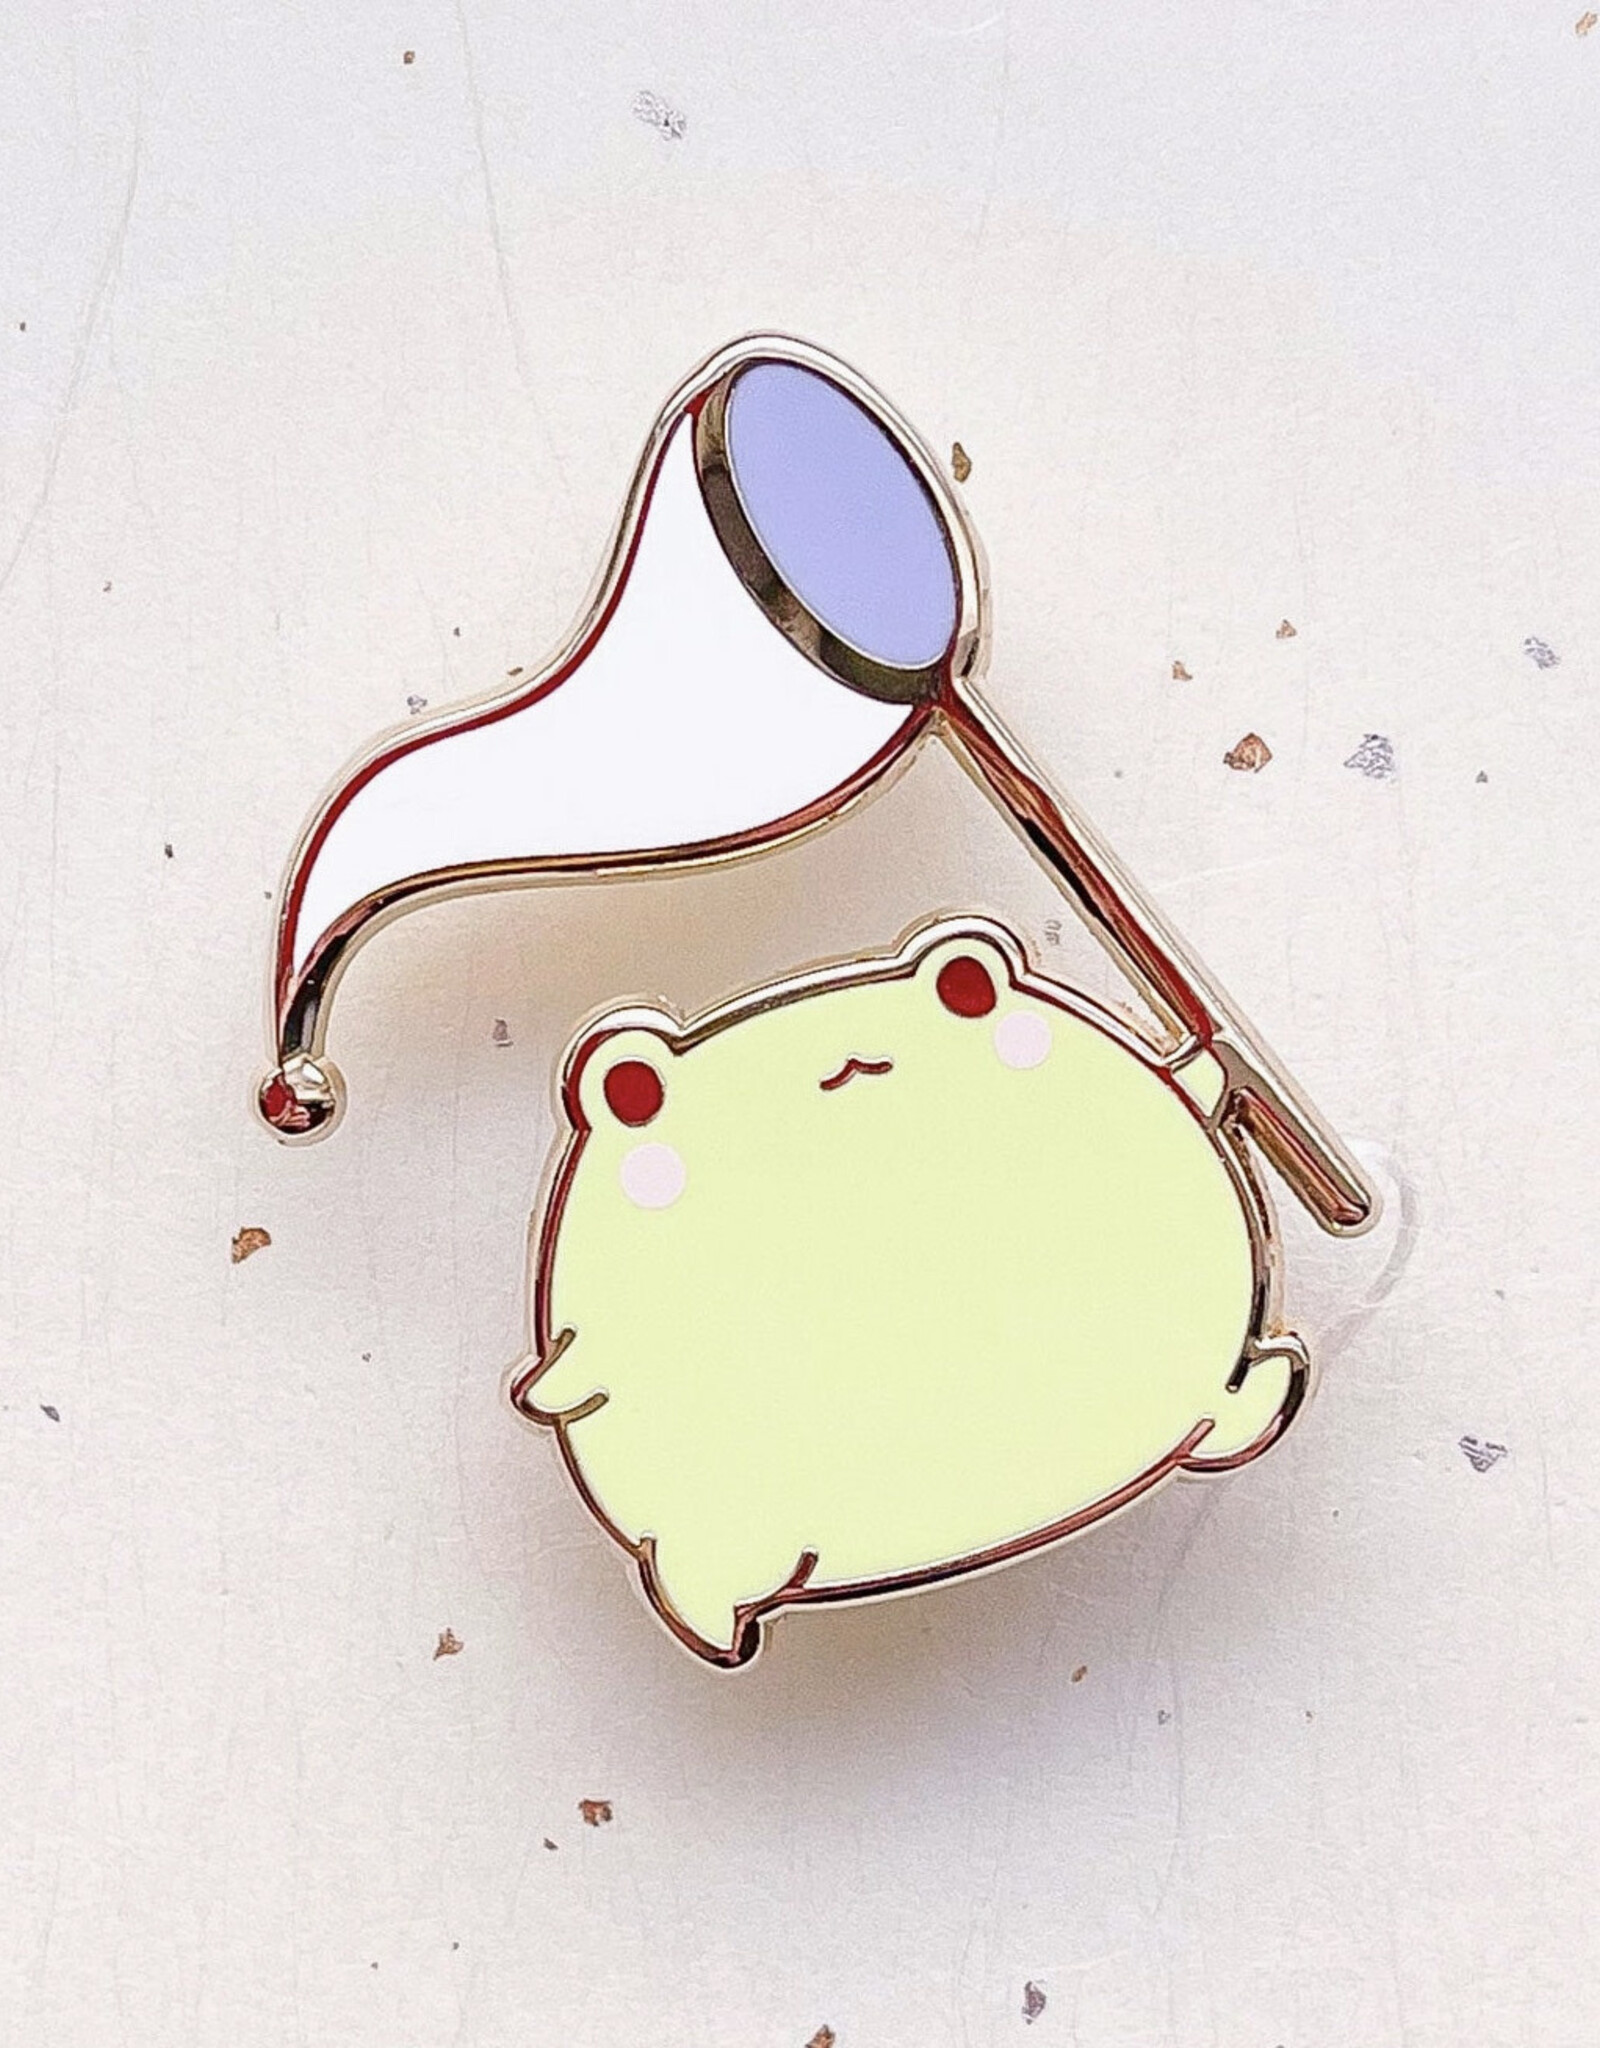 Gogo the Frog with Butterfly Net Enamel Pin